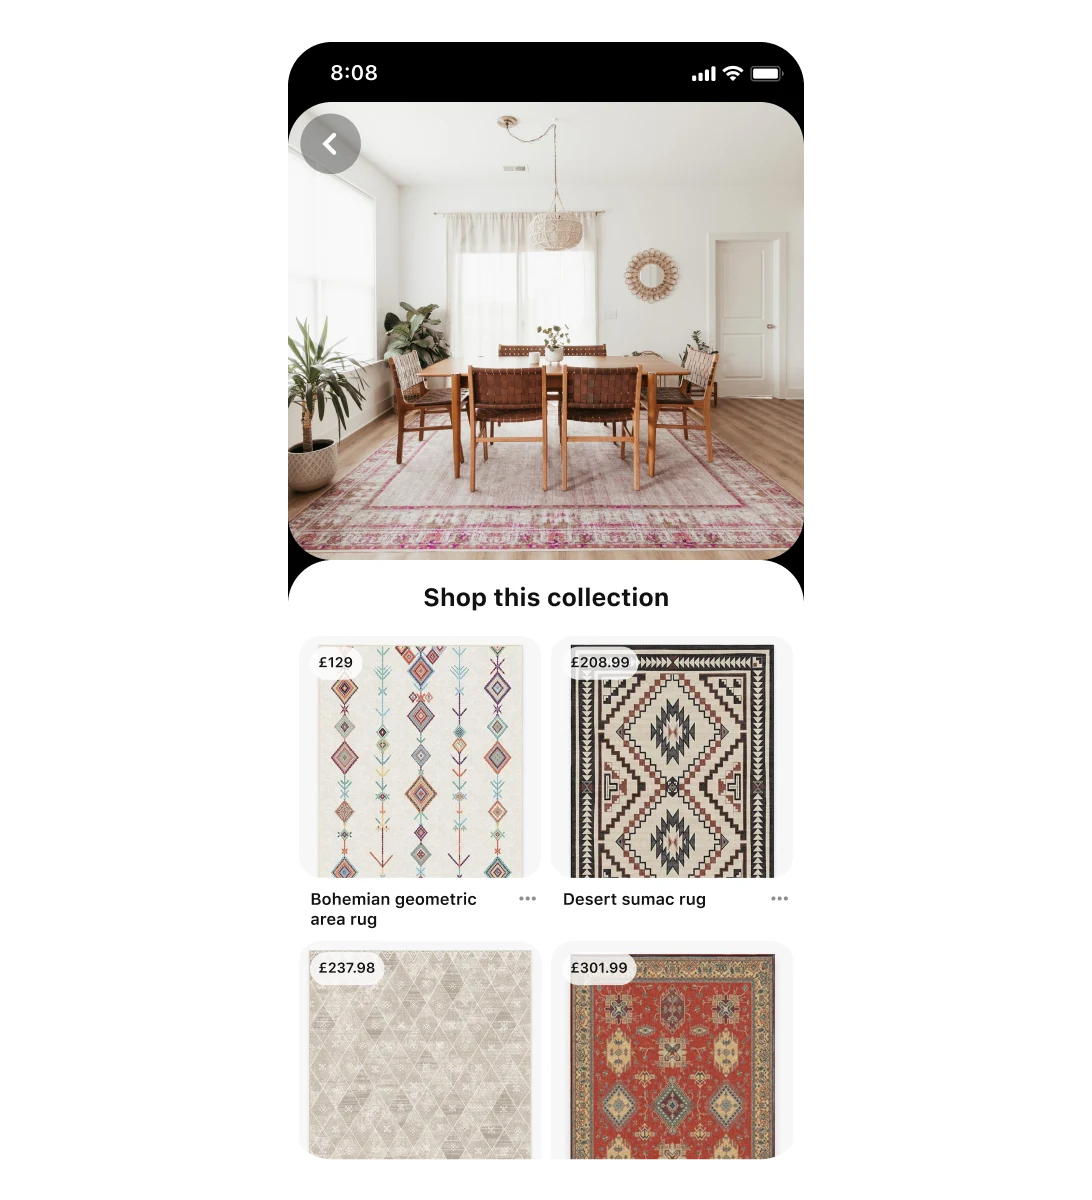 Mobile view of a collections ad for rugs. The ad creative is of a dining table with a large vintage-style area rug beneath it. Below it are four images showing rugs of a similar style but with varying designs and prices.